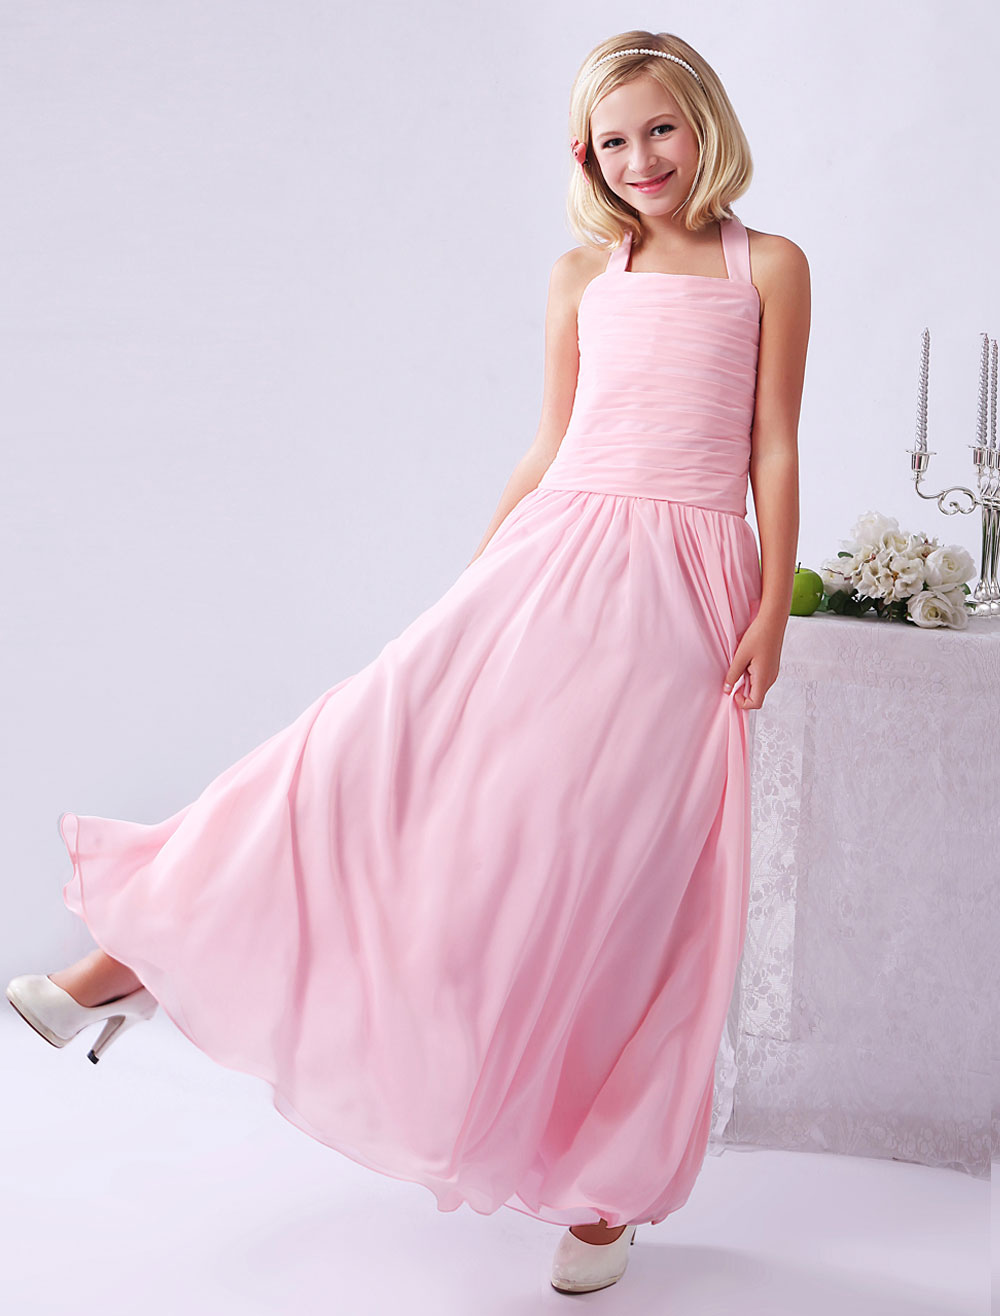 A-line Pink Chiffon Pleated Halter Junior Bridesmaid Dress - www.bagsaleusa.com/product-category/scarves/